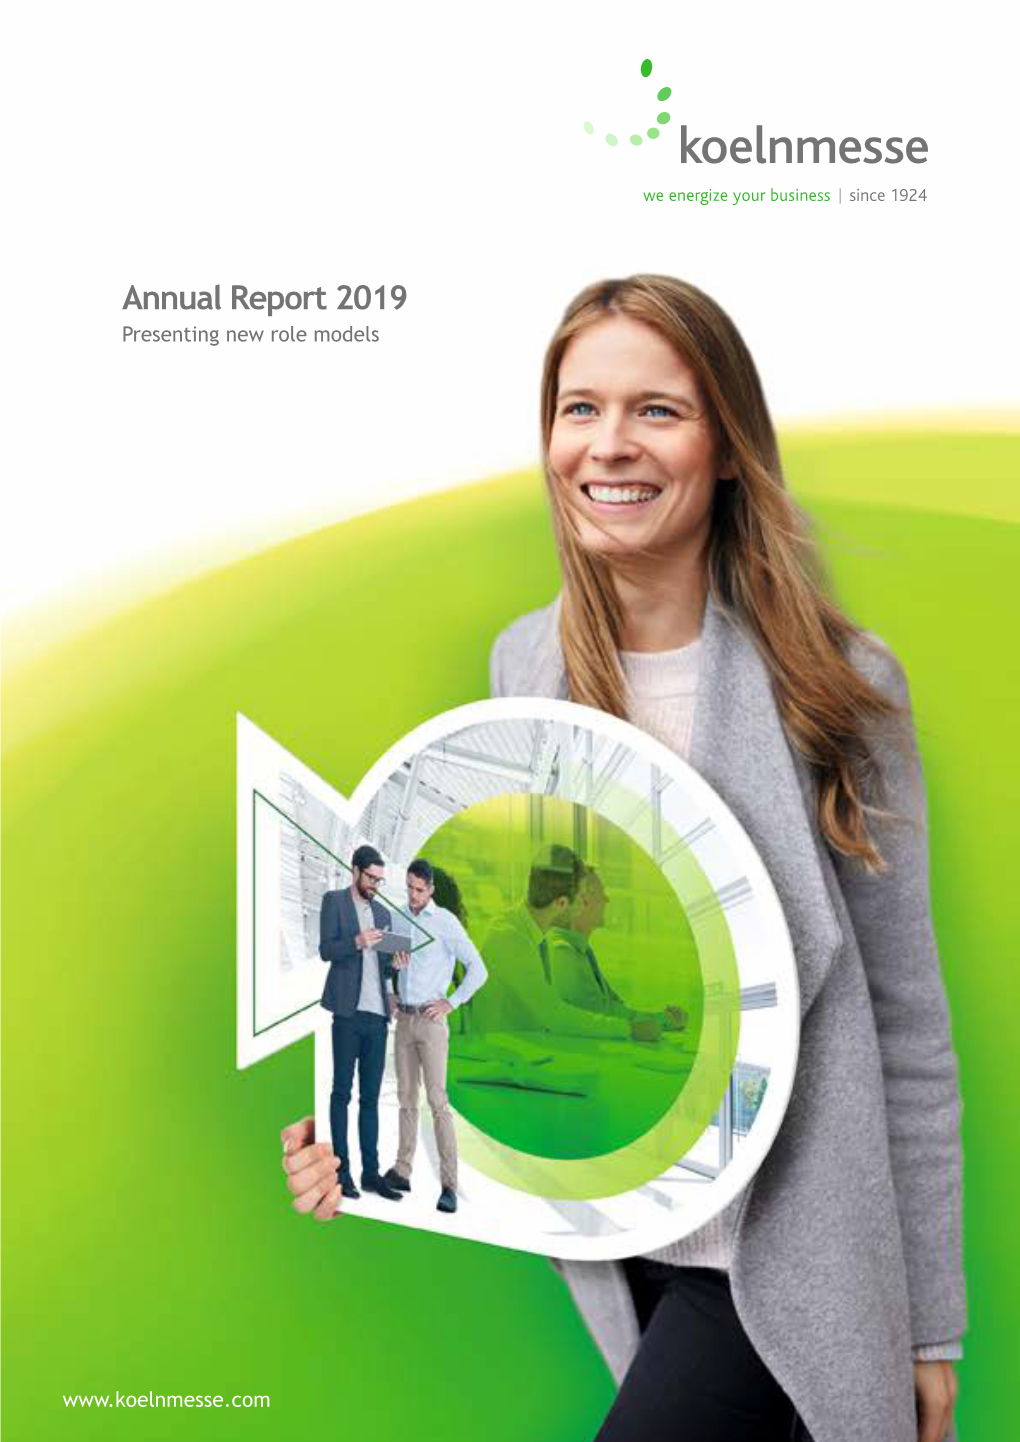 Annual Report 2019 Presenting New Role Models 2020 Printed in Germany 0 5